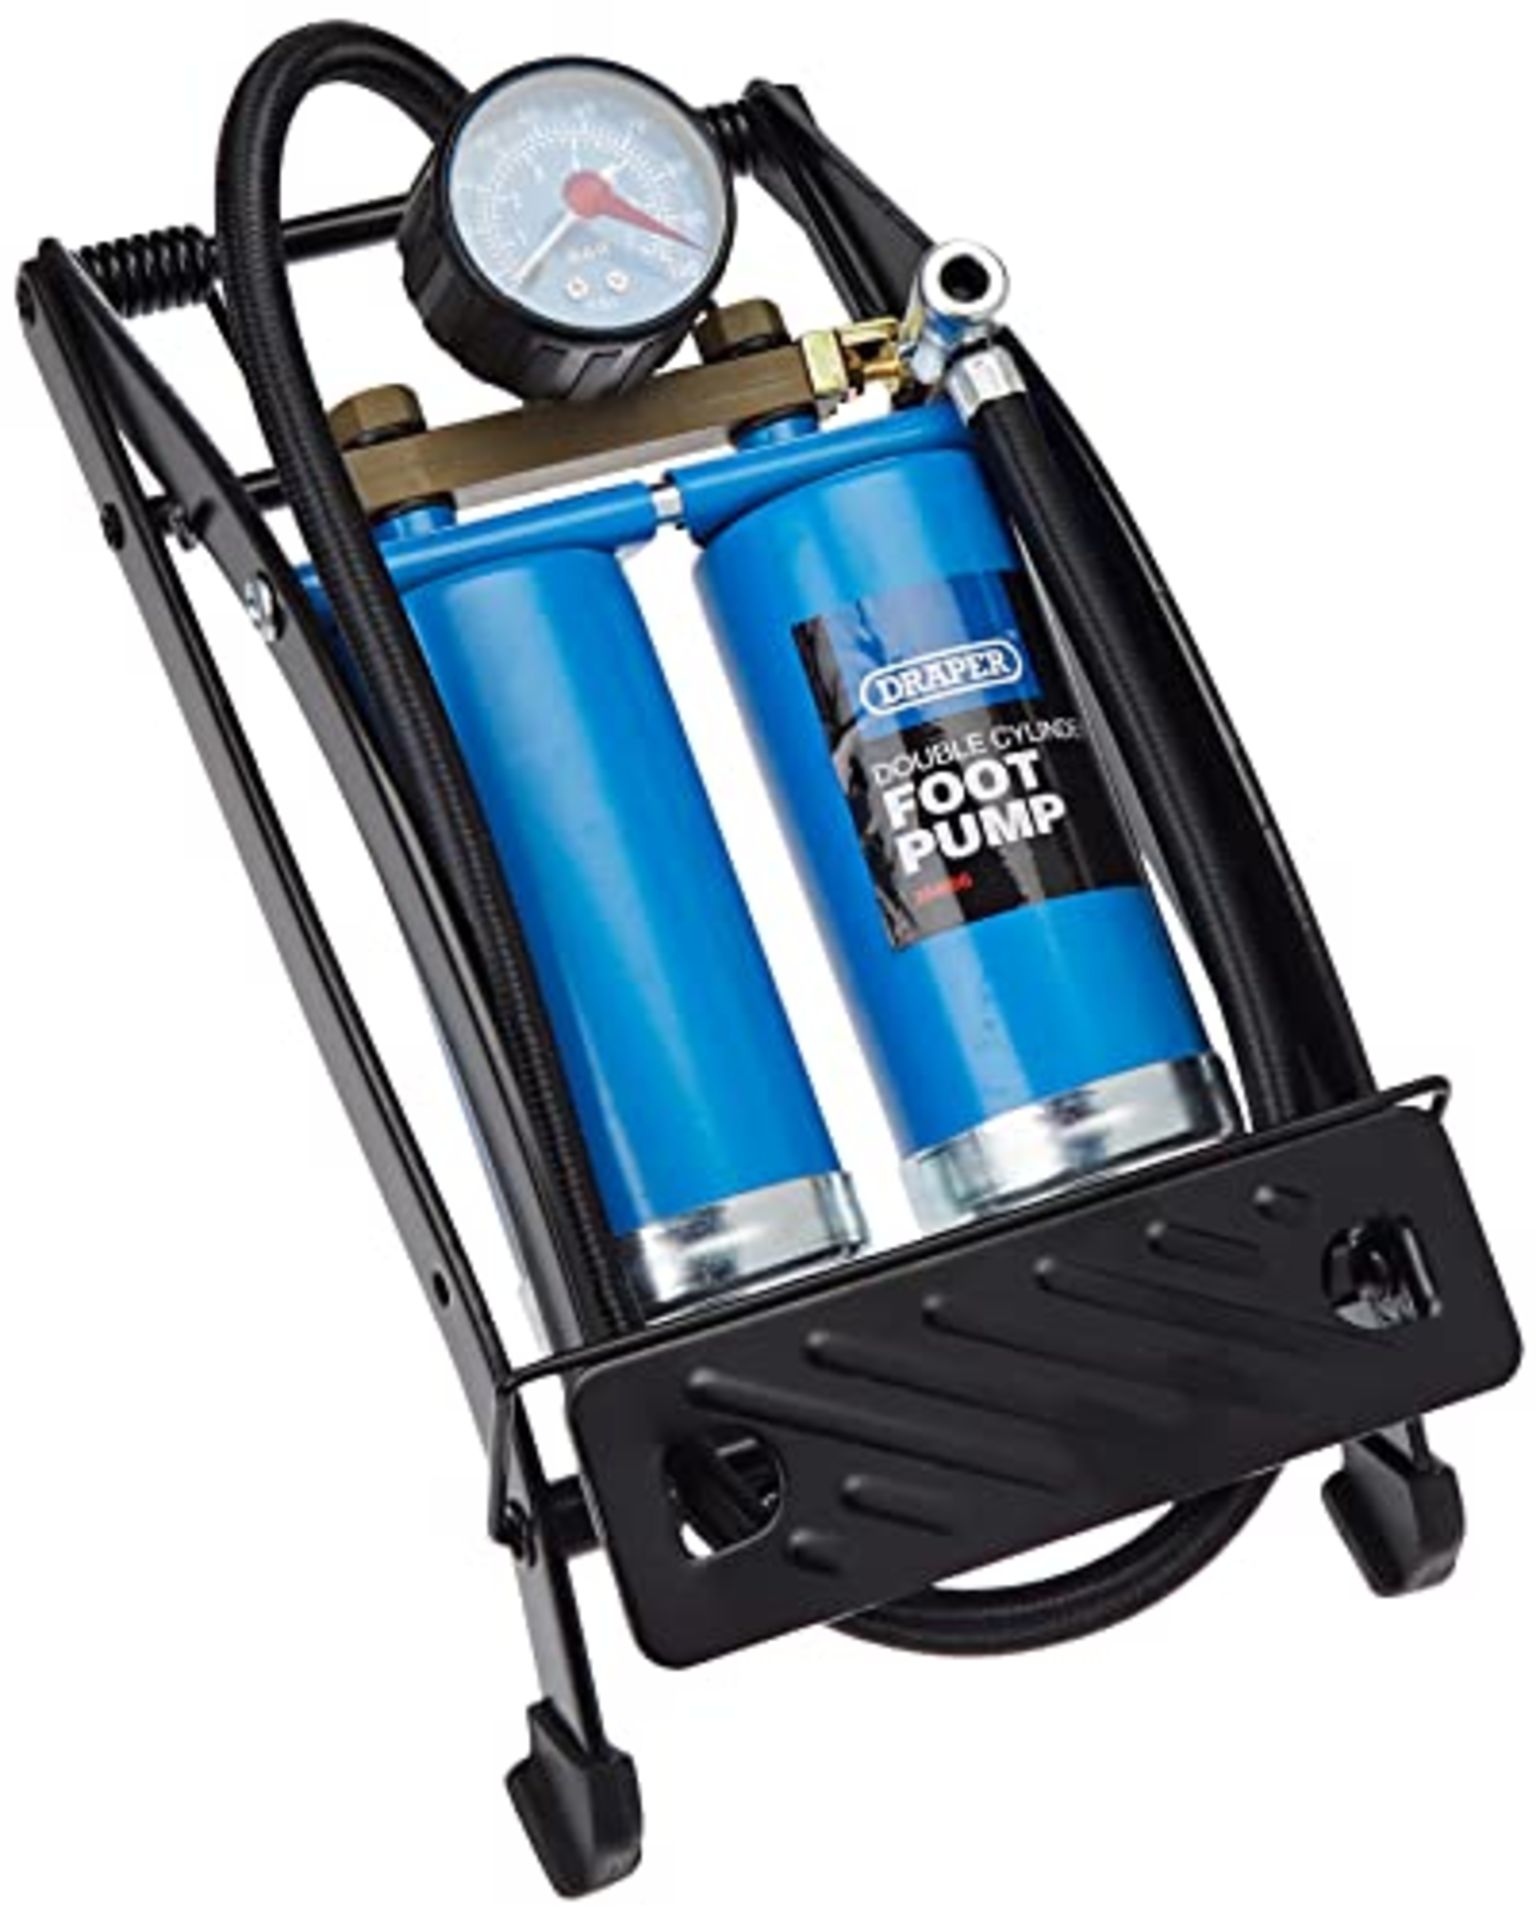 Draper Double-Cylinder Foot Pump with Pressure Gauge & Accessories - 25996 - Manual In